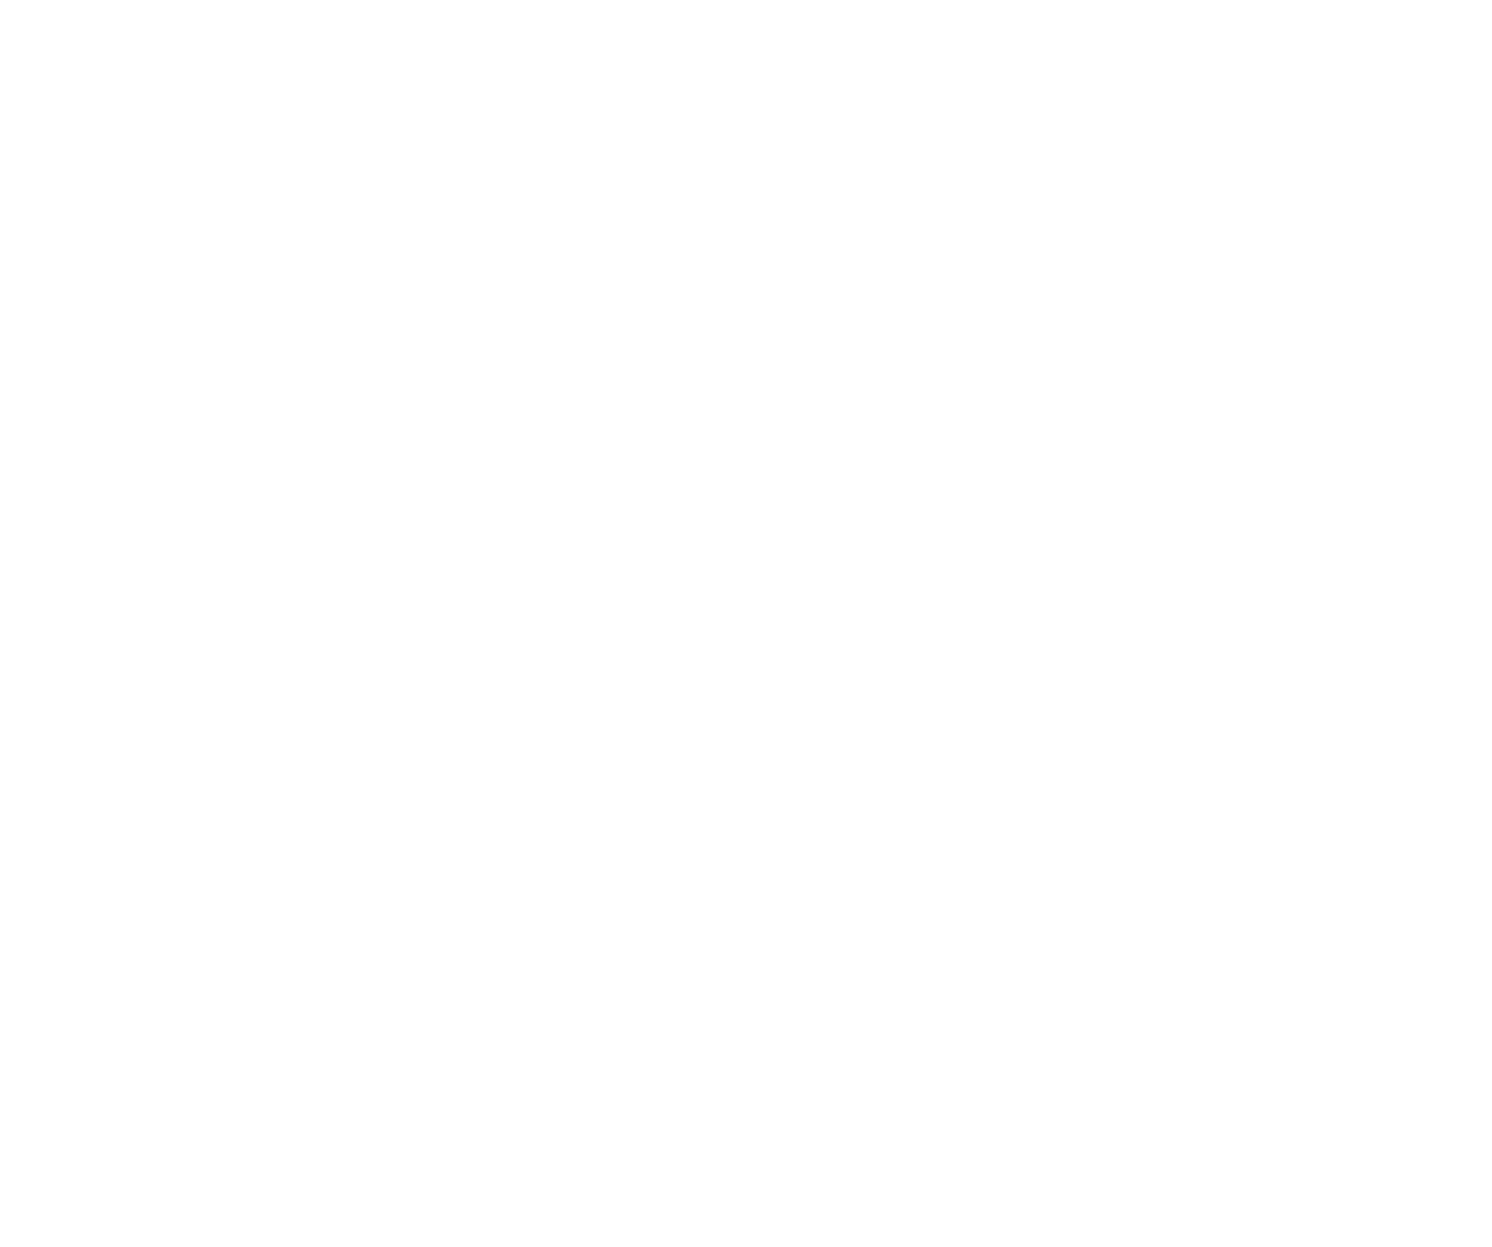 Fired Up! logo